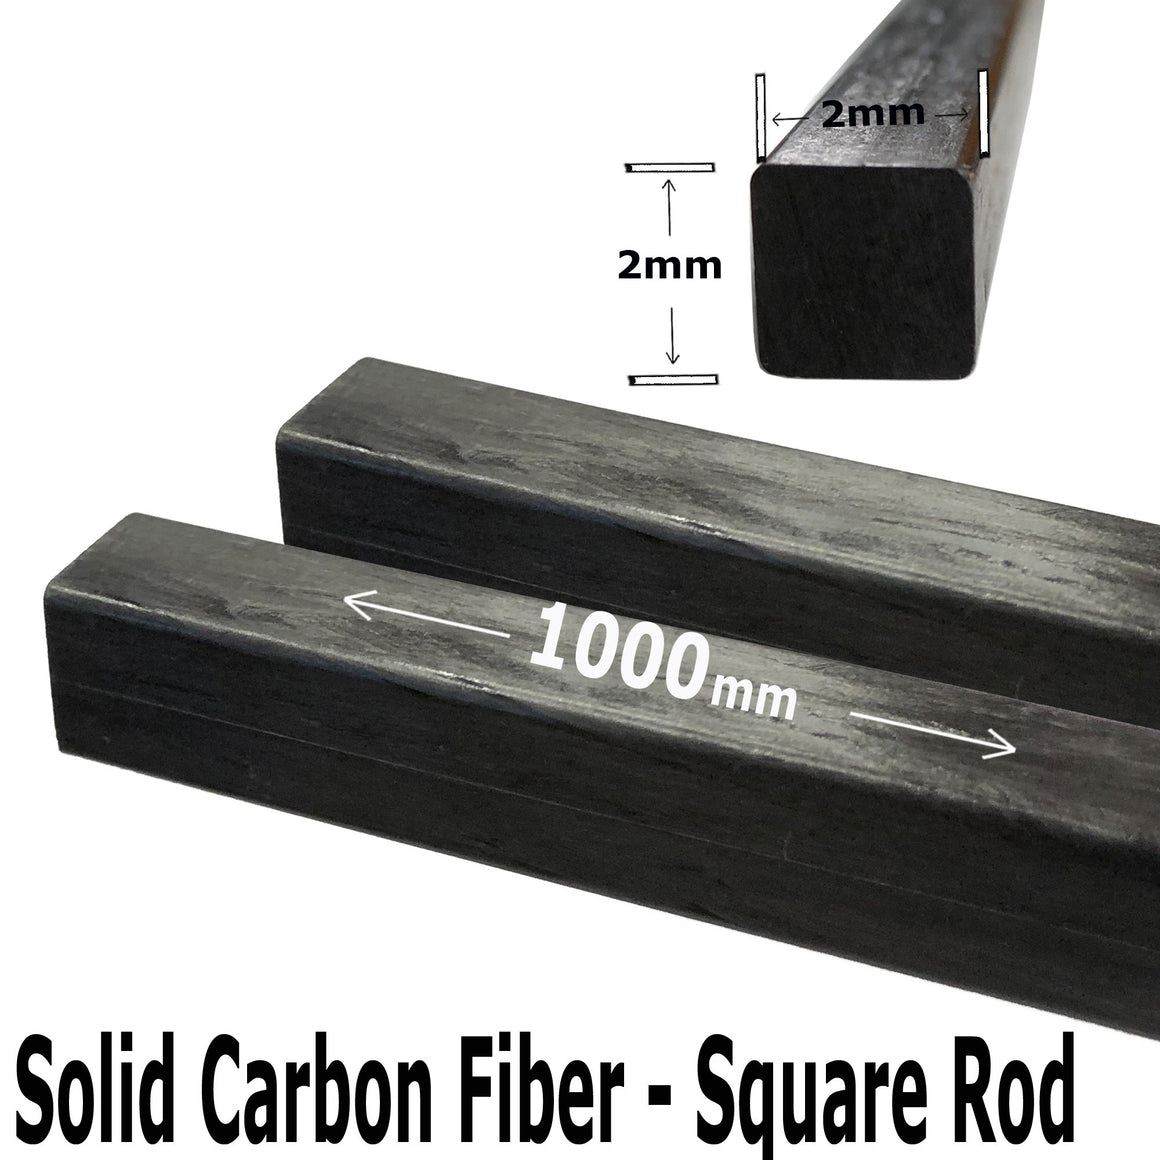 (1) 2mm X 1000mm - PULTRUDED-Square Carbon Fiber Rod. 100% Pultruded high Strength Carbon Fiber. Used for Drones, Radio Controlled Vehicles. Projects requiring high Strength to Weight Components.